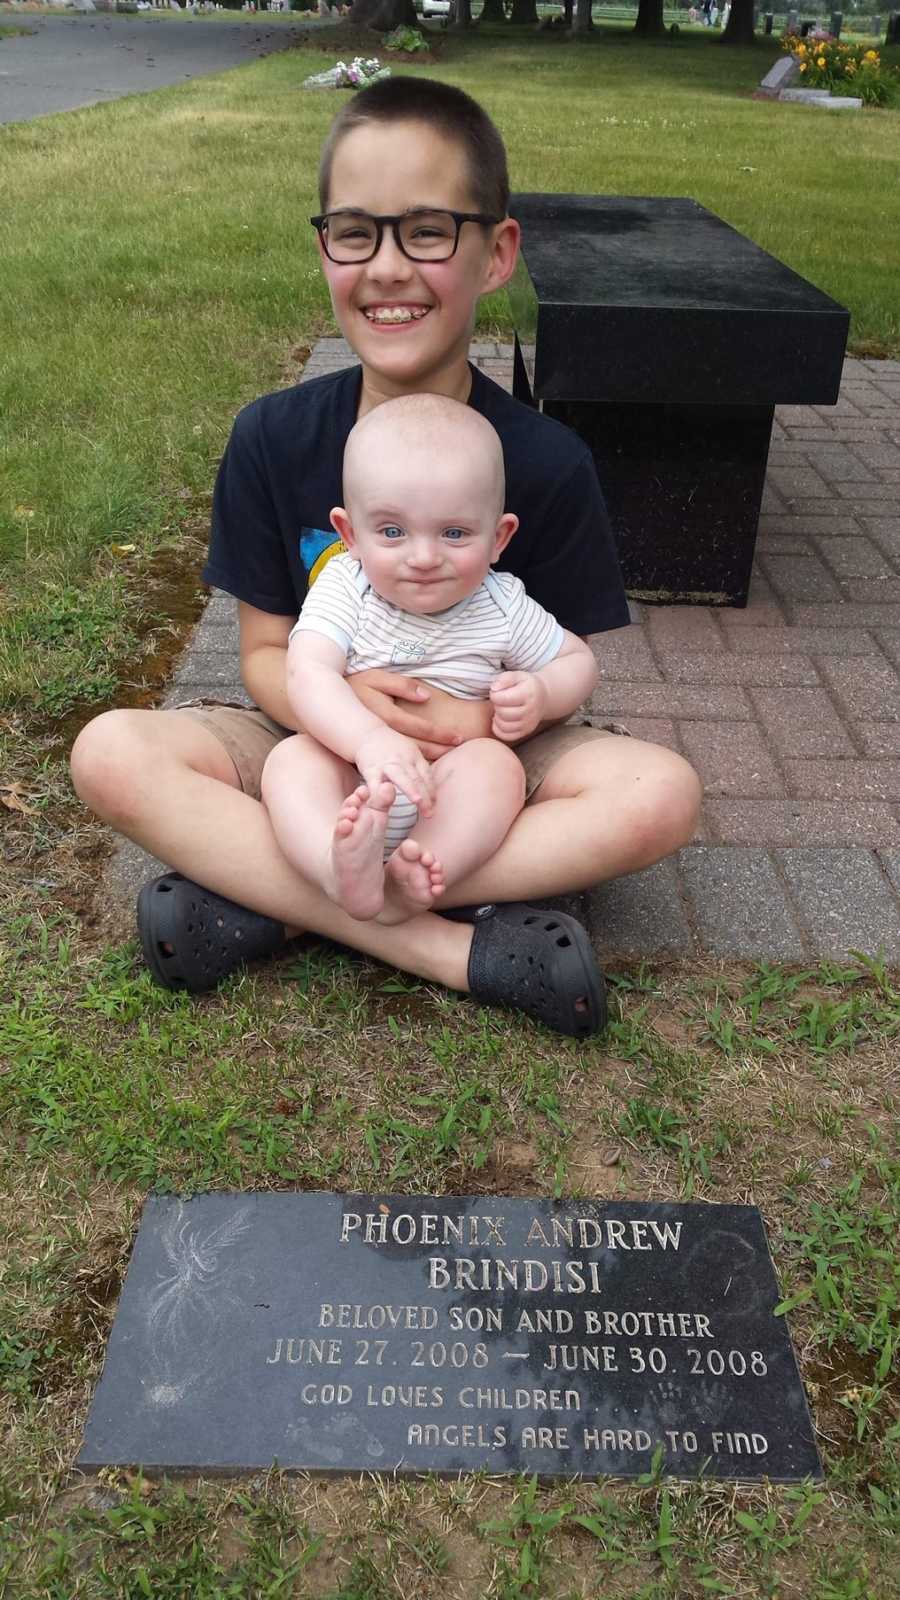 Young boy sits by twin's grave who died at birth, with baby brother sitting in his lap